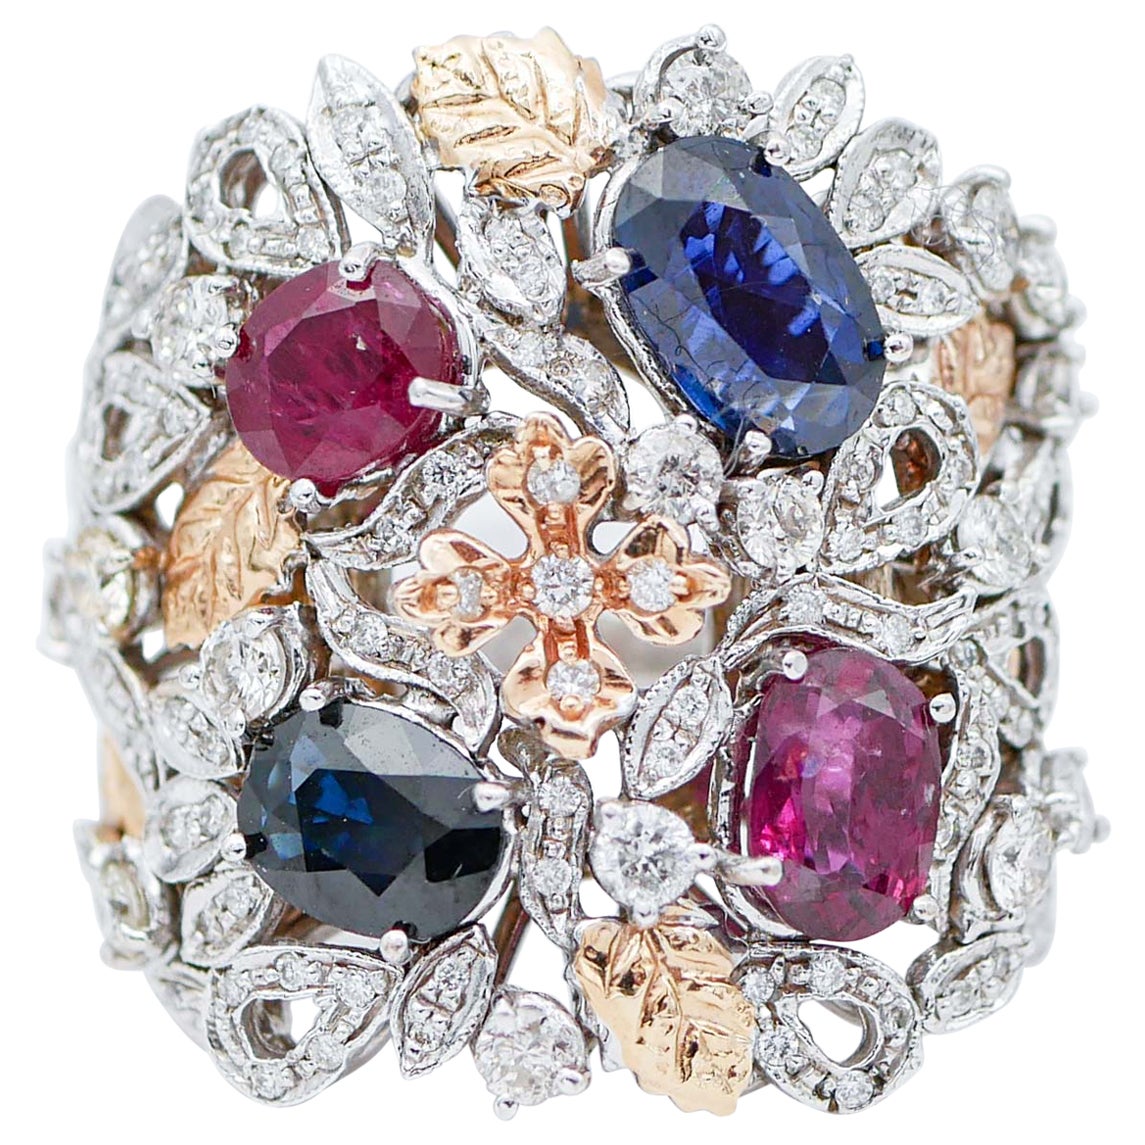 Sapphires, Rubies, Diamonds, 14 Karat White and Rose Gold Ring. For Sale